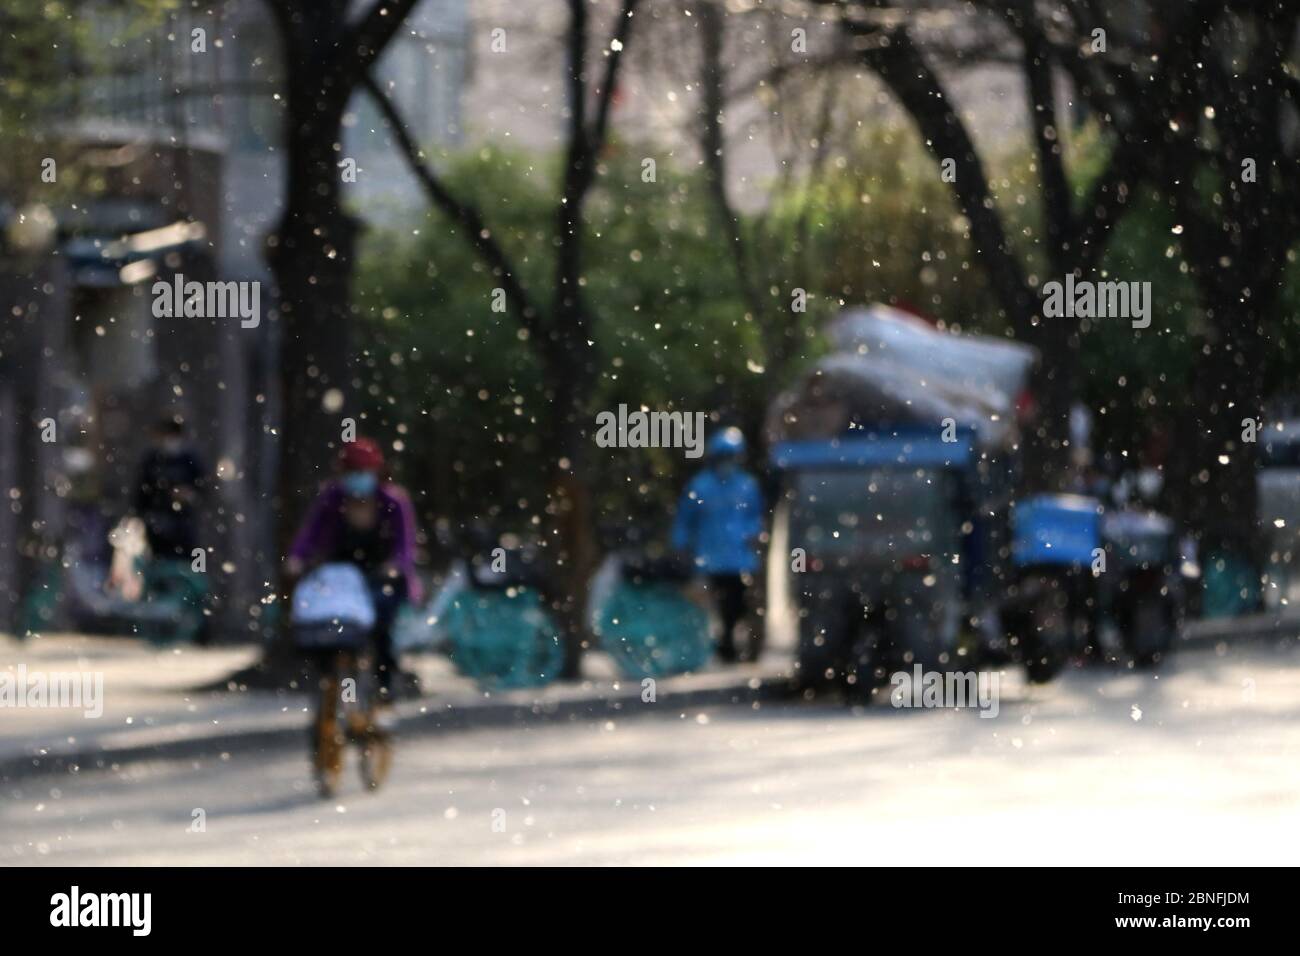 Beijing has about 2 million female poplar and willow trees which produce catkins to spread their seeds every spring, and this year's 'April snow' seas Stock Photo